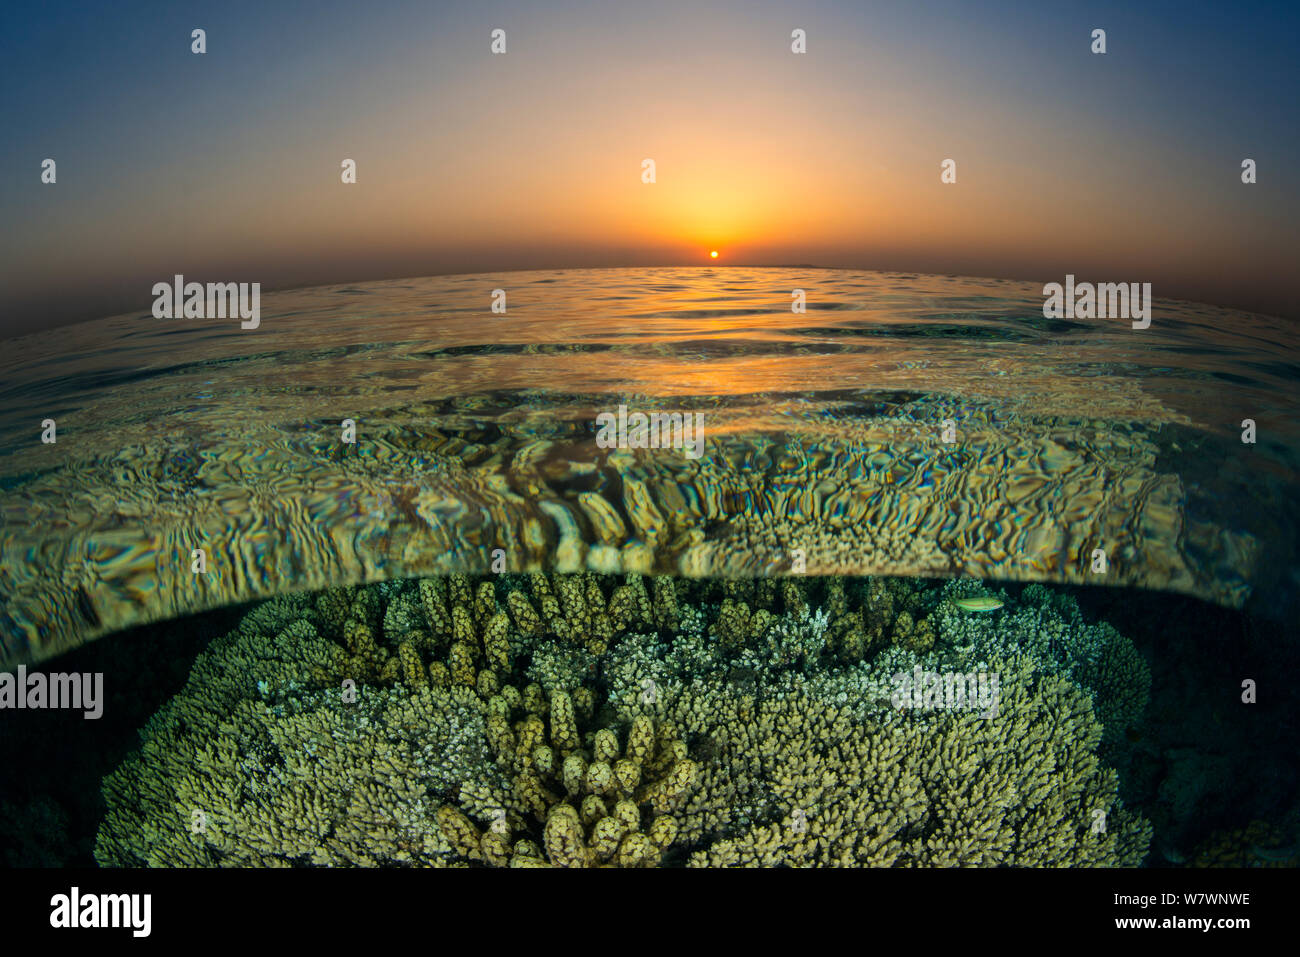 Split level view of coral reef with corals (Acropora sp.) and Sargassum seaweed (Turbinaria decurrens) at sunset. Abu Nuhas, Egypt. Strait of Gubal, Red Sea. Stock Photo